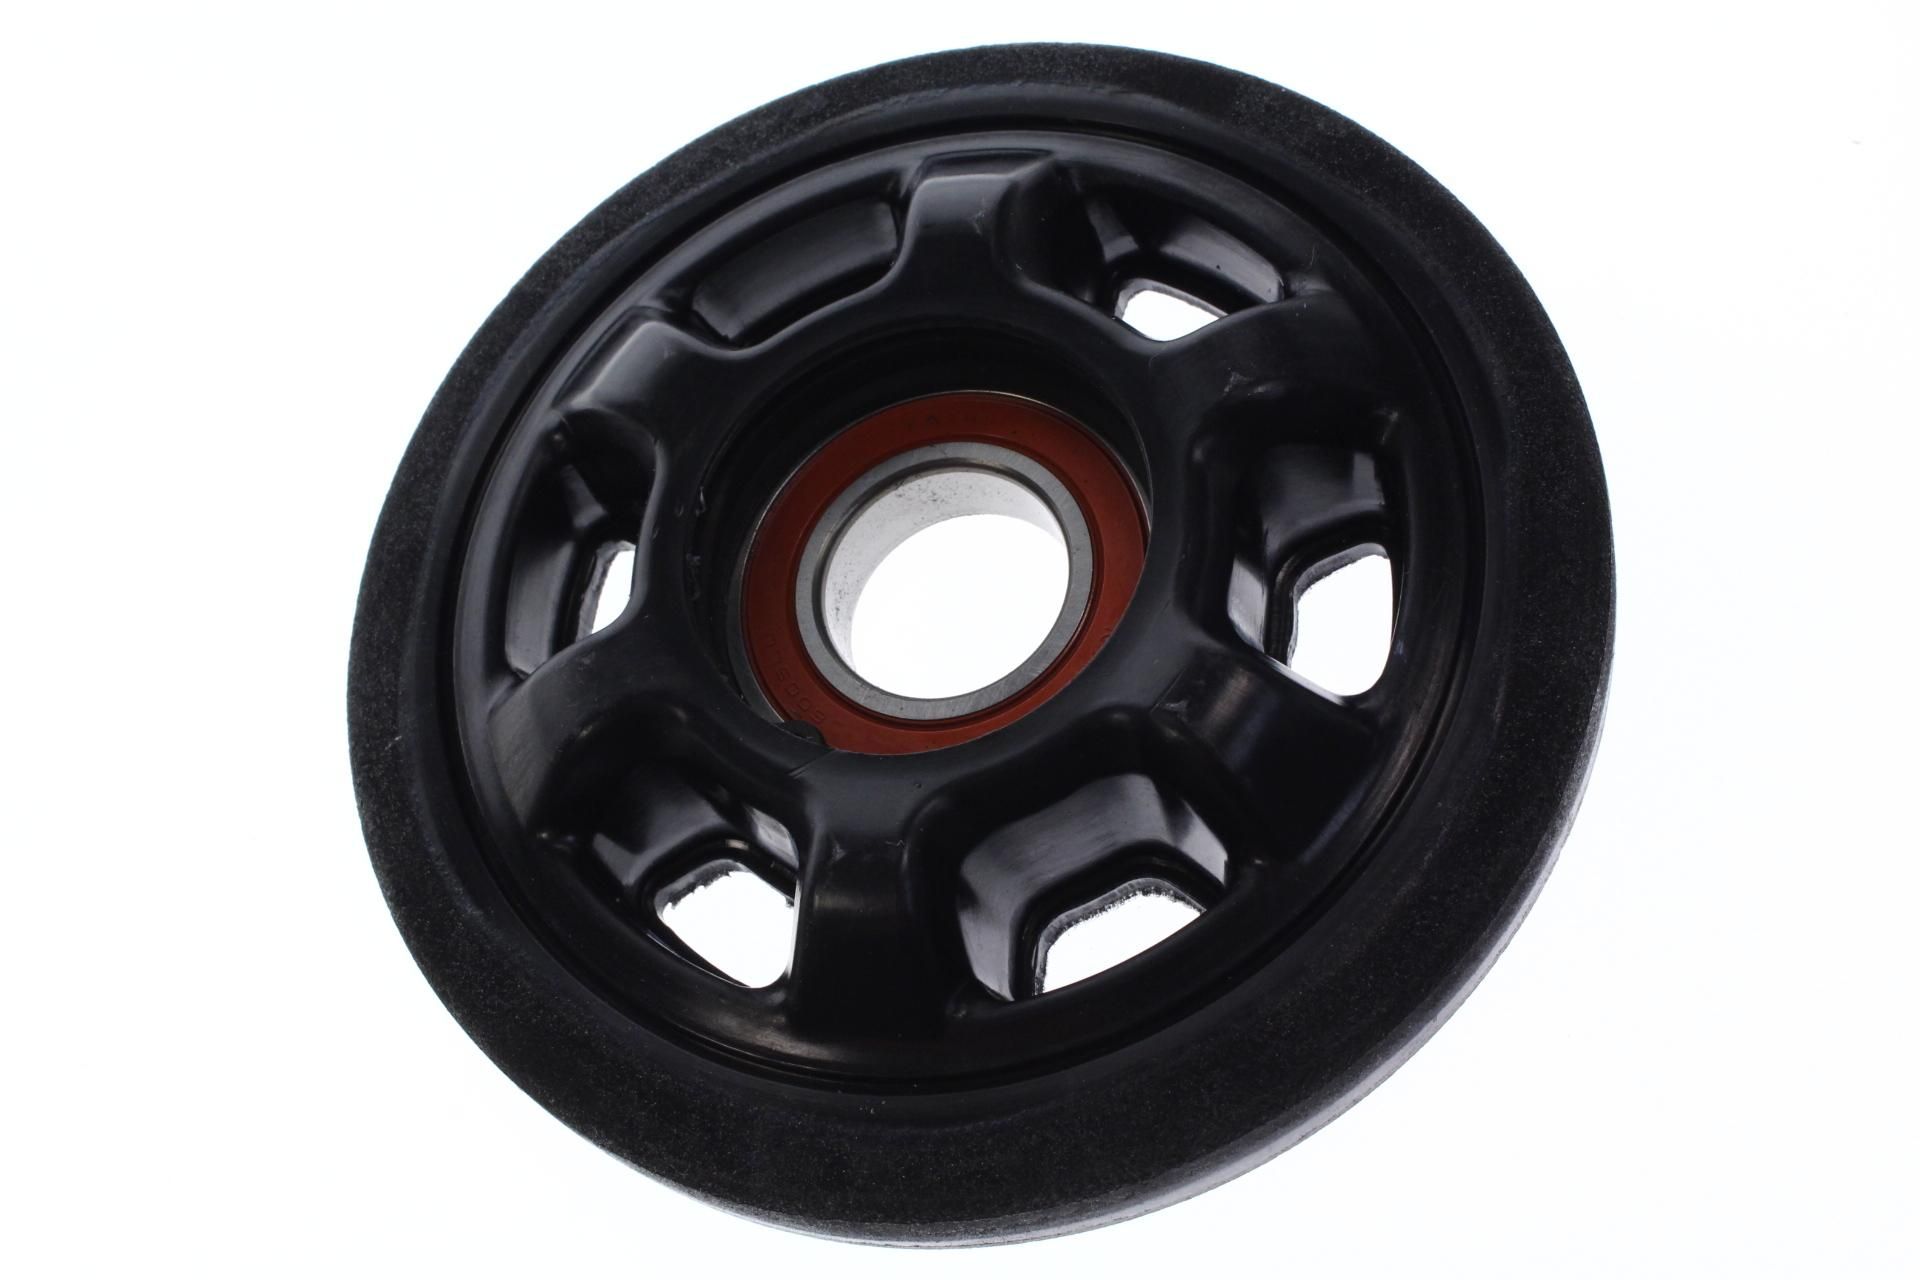 8HF-47310-10-00 Superseded by SMA-8FP38-01-BK - WHEEL BLK 130MM